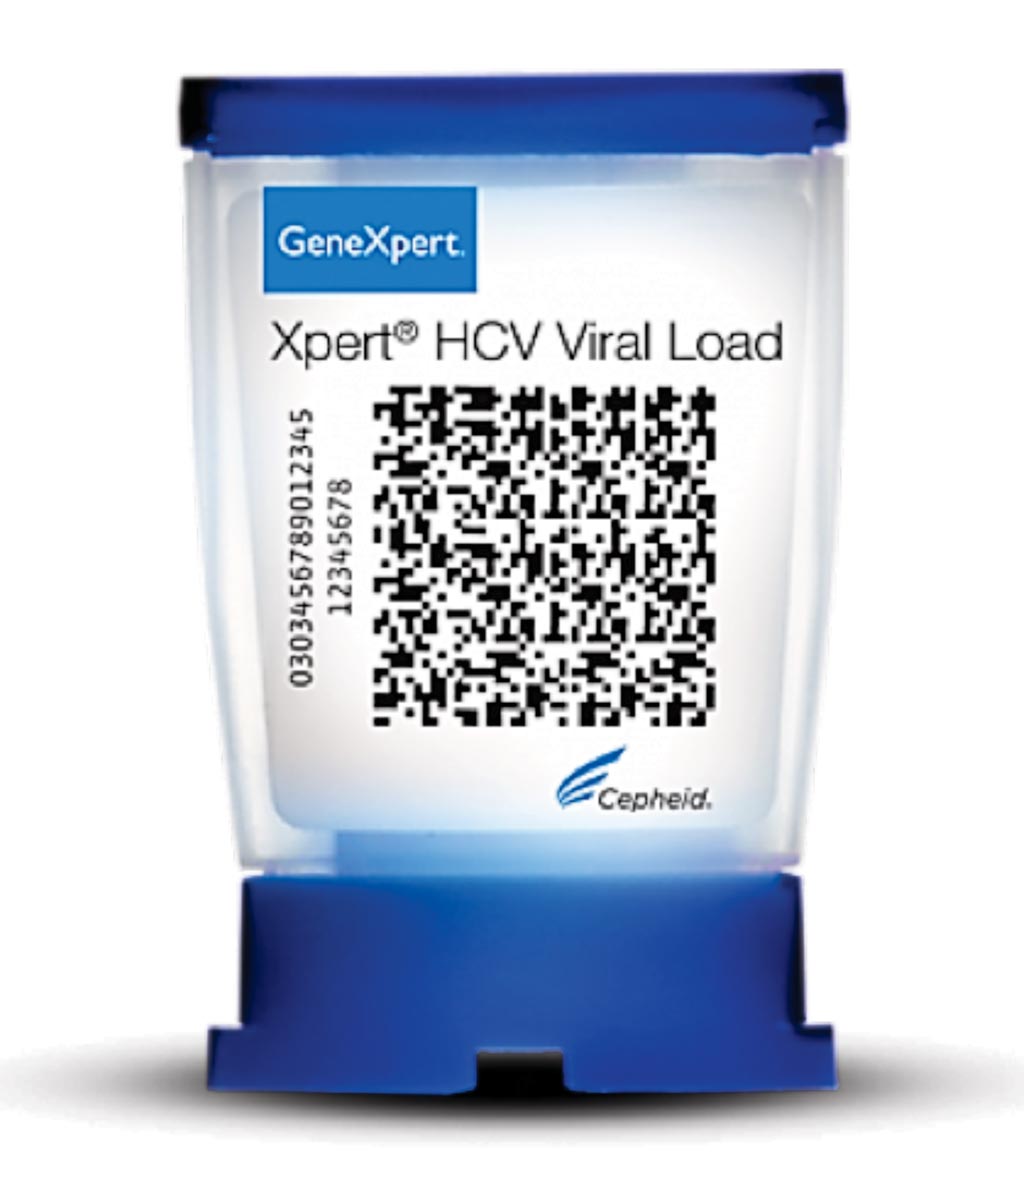 Image: The Xpert HCV Viral Load cartridge, a quantitative test that provides on-demand molecular testing for confirmation of infection and monitoring of Hepatitis C virus (HCV) (Photo courtesy of Cepheid).